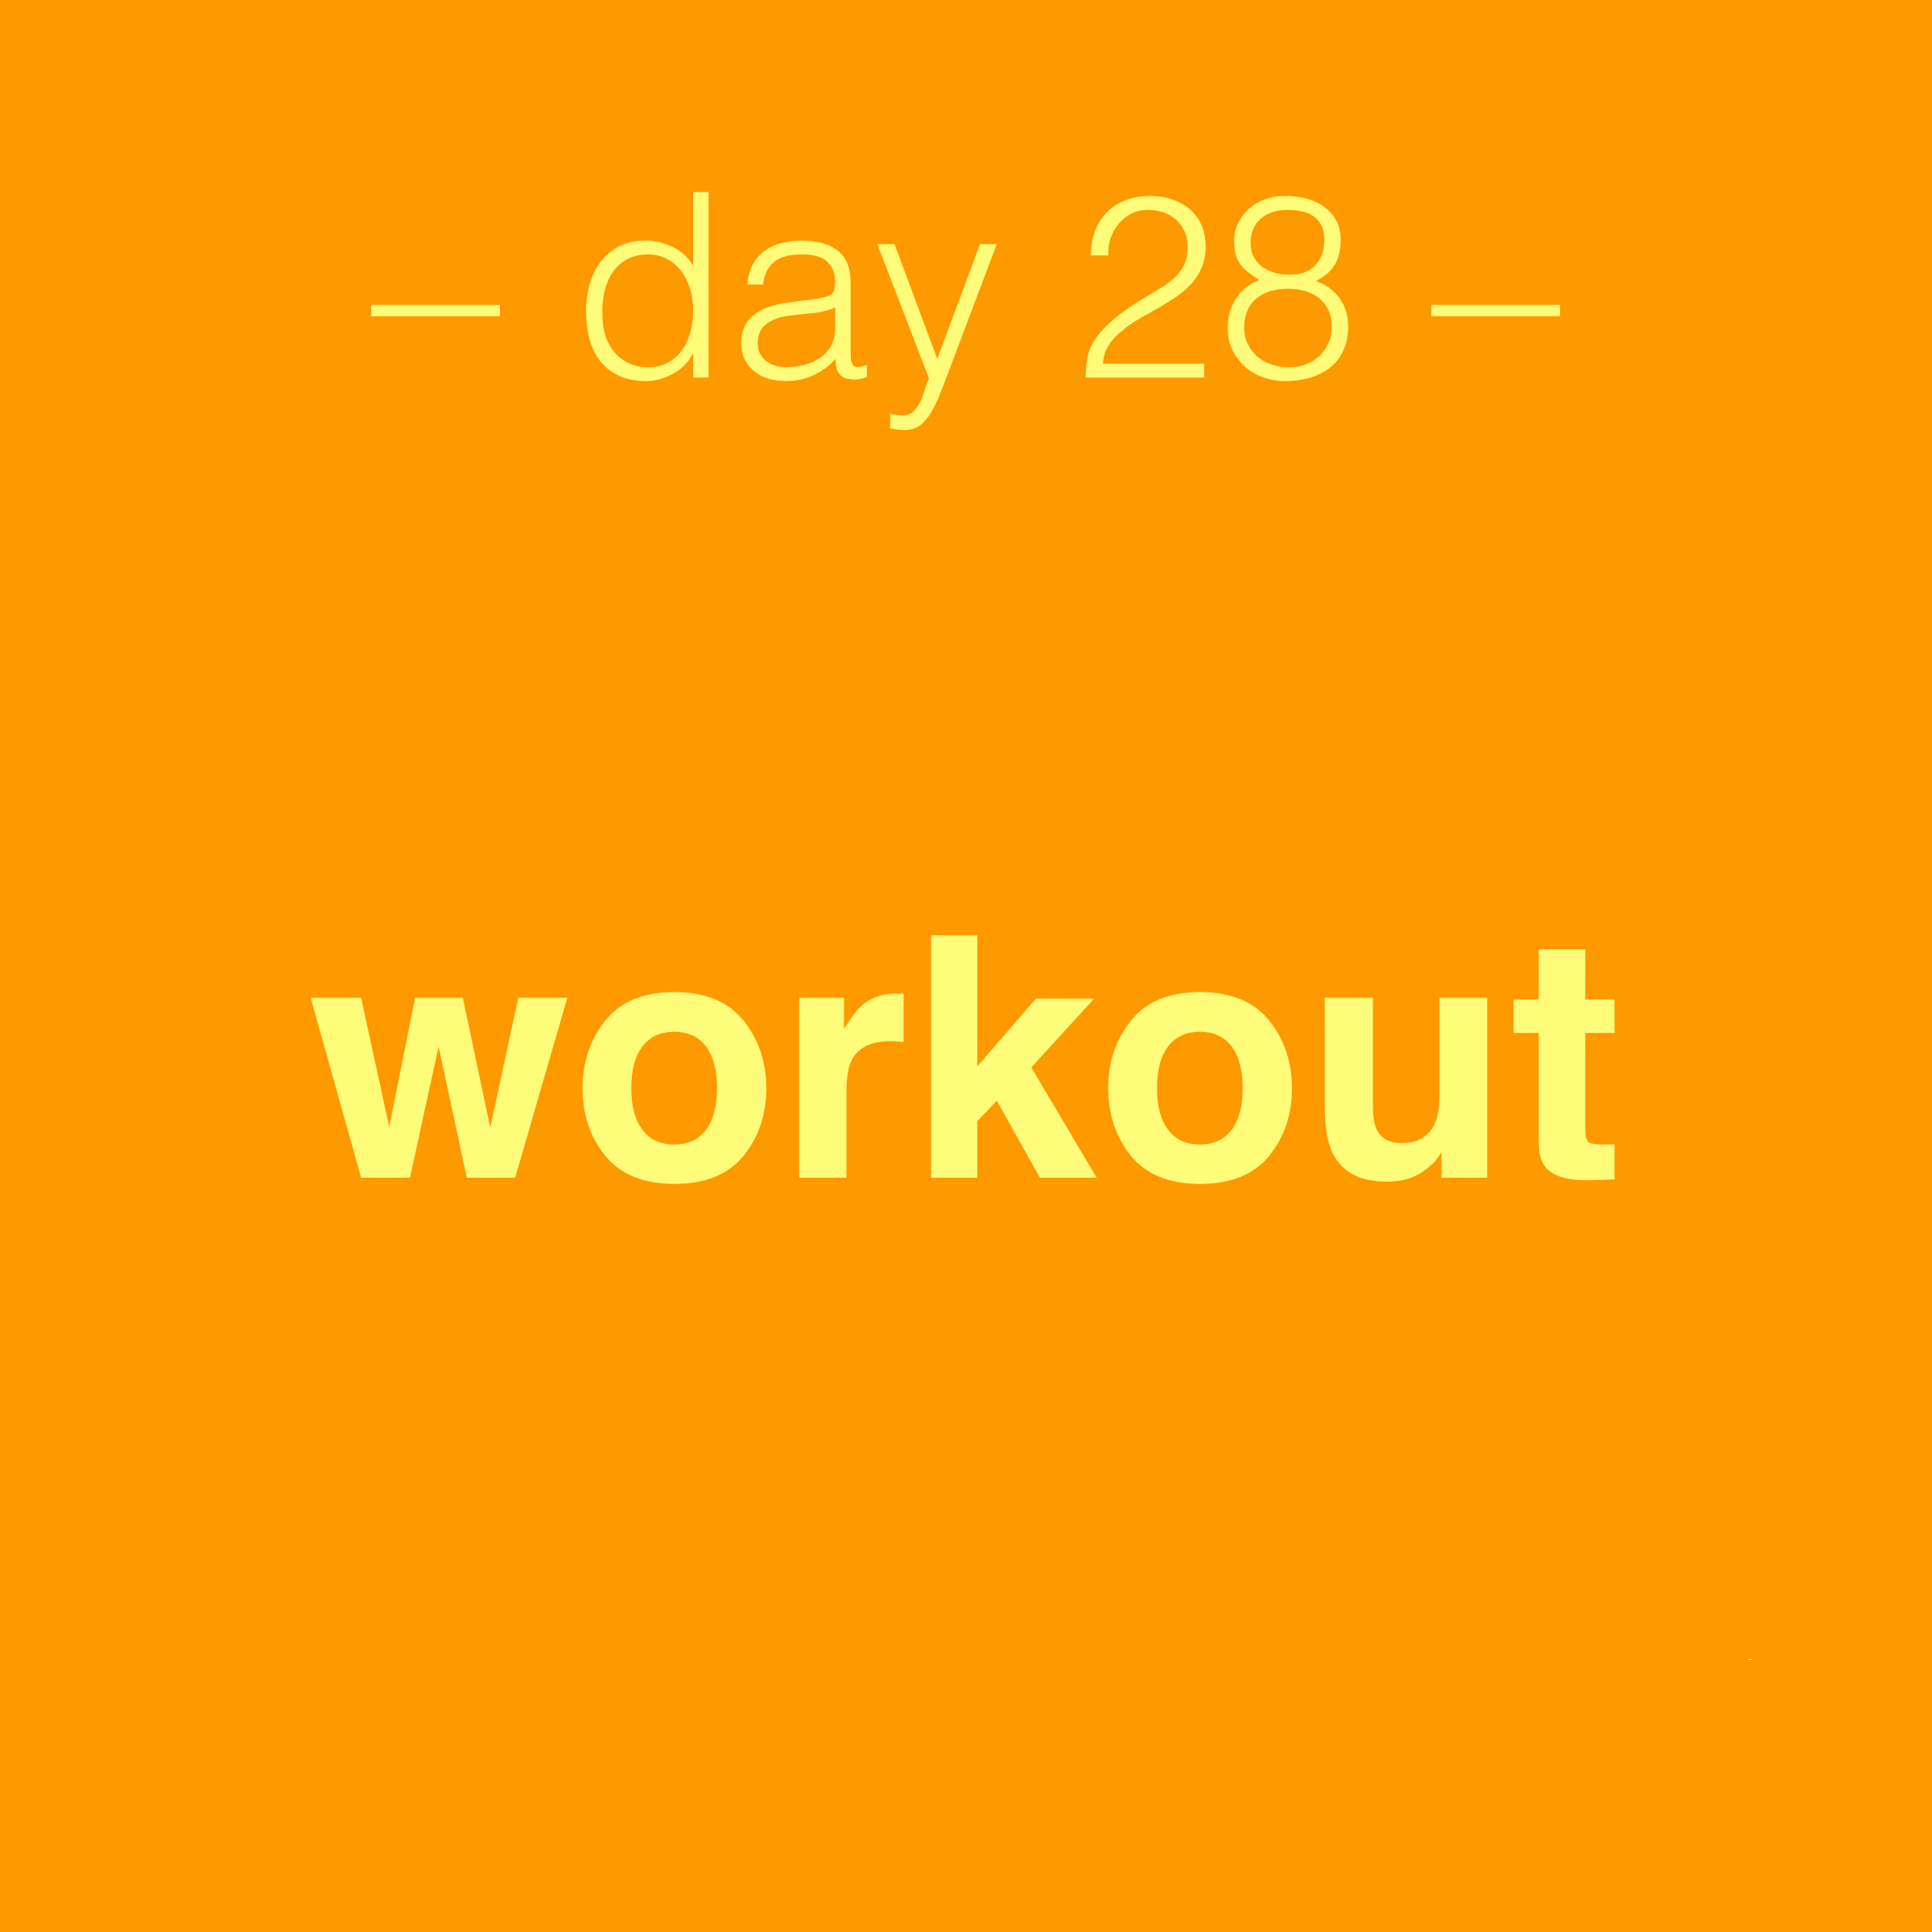 day 28 - workout